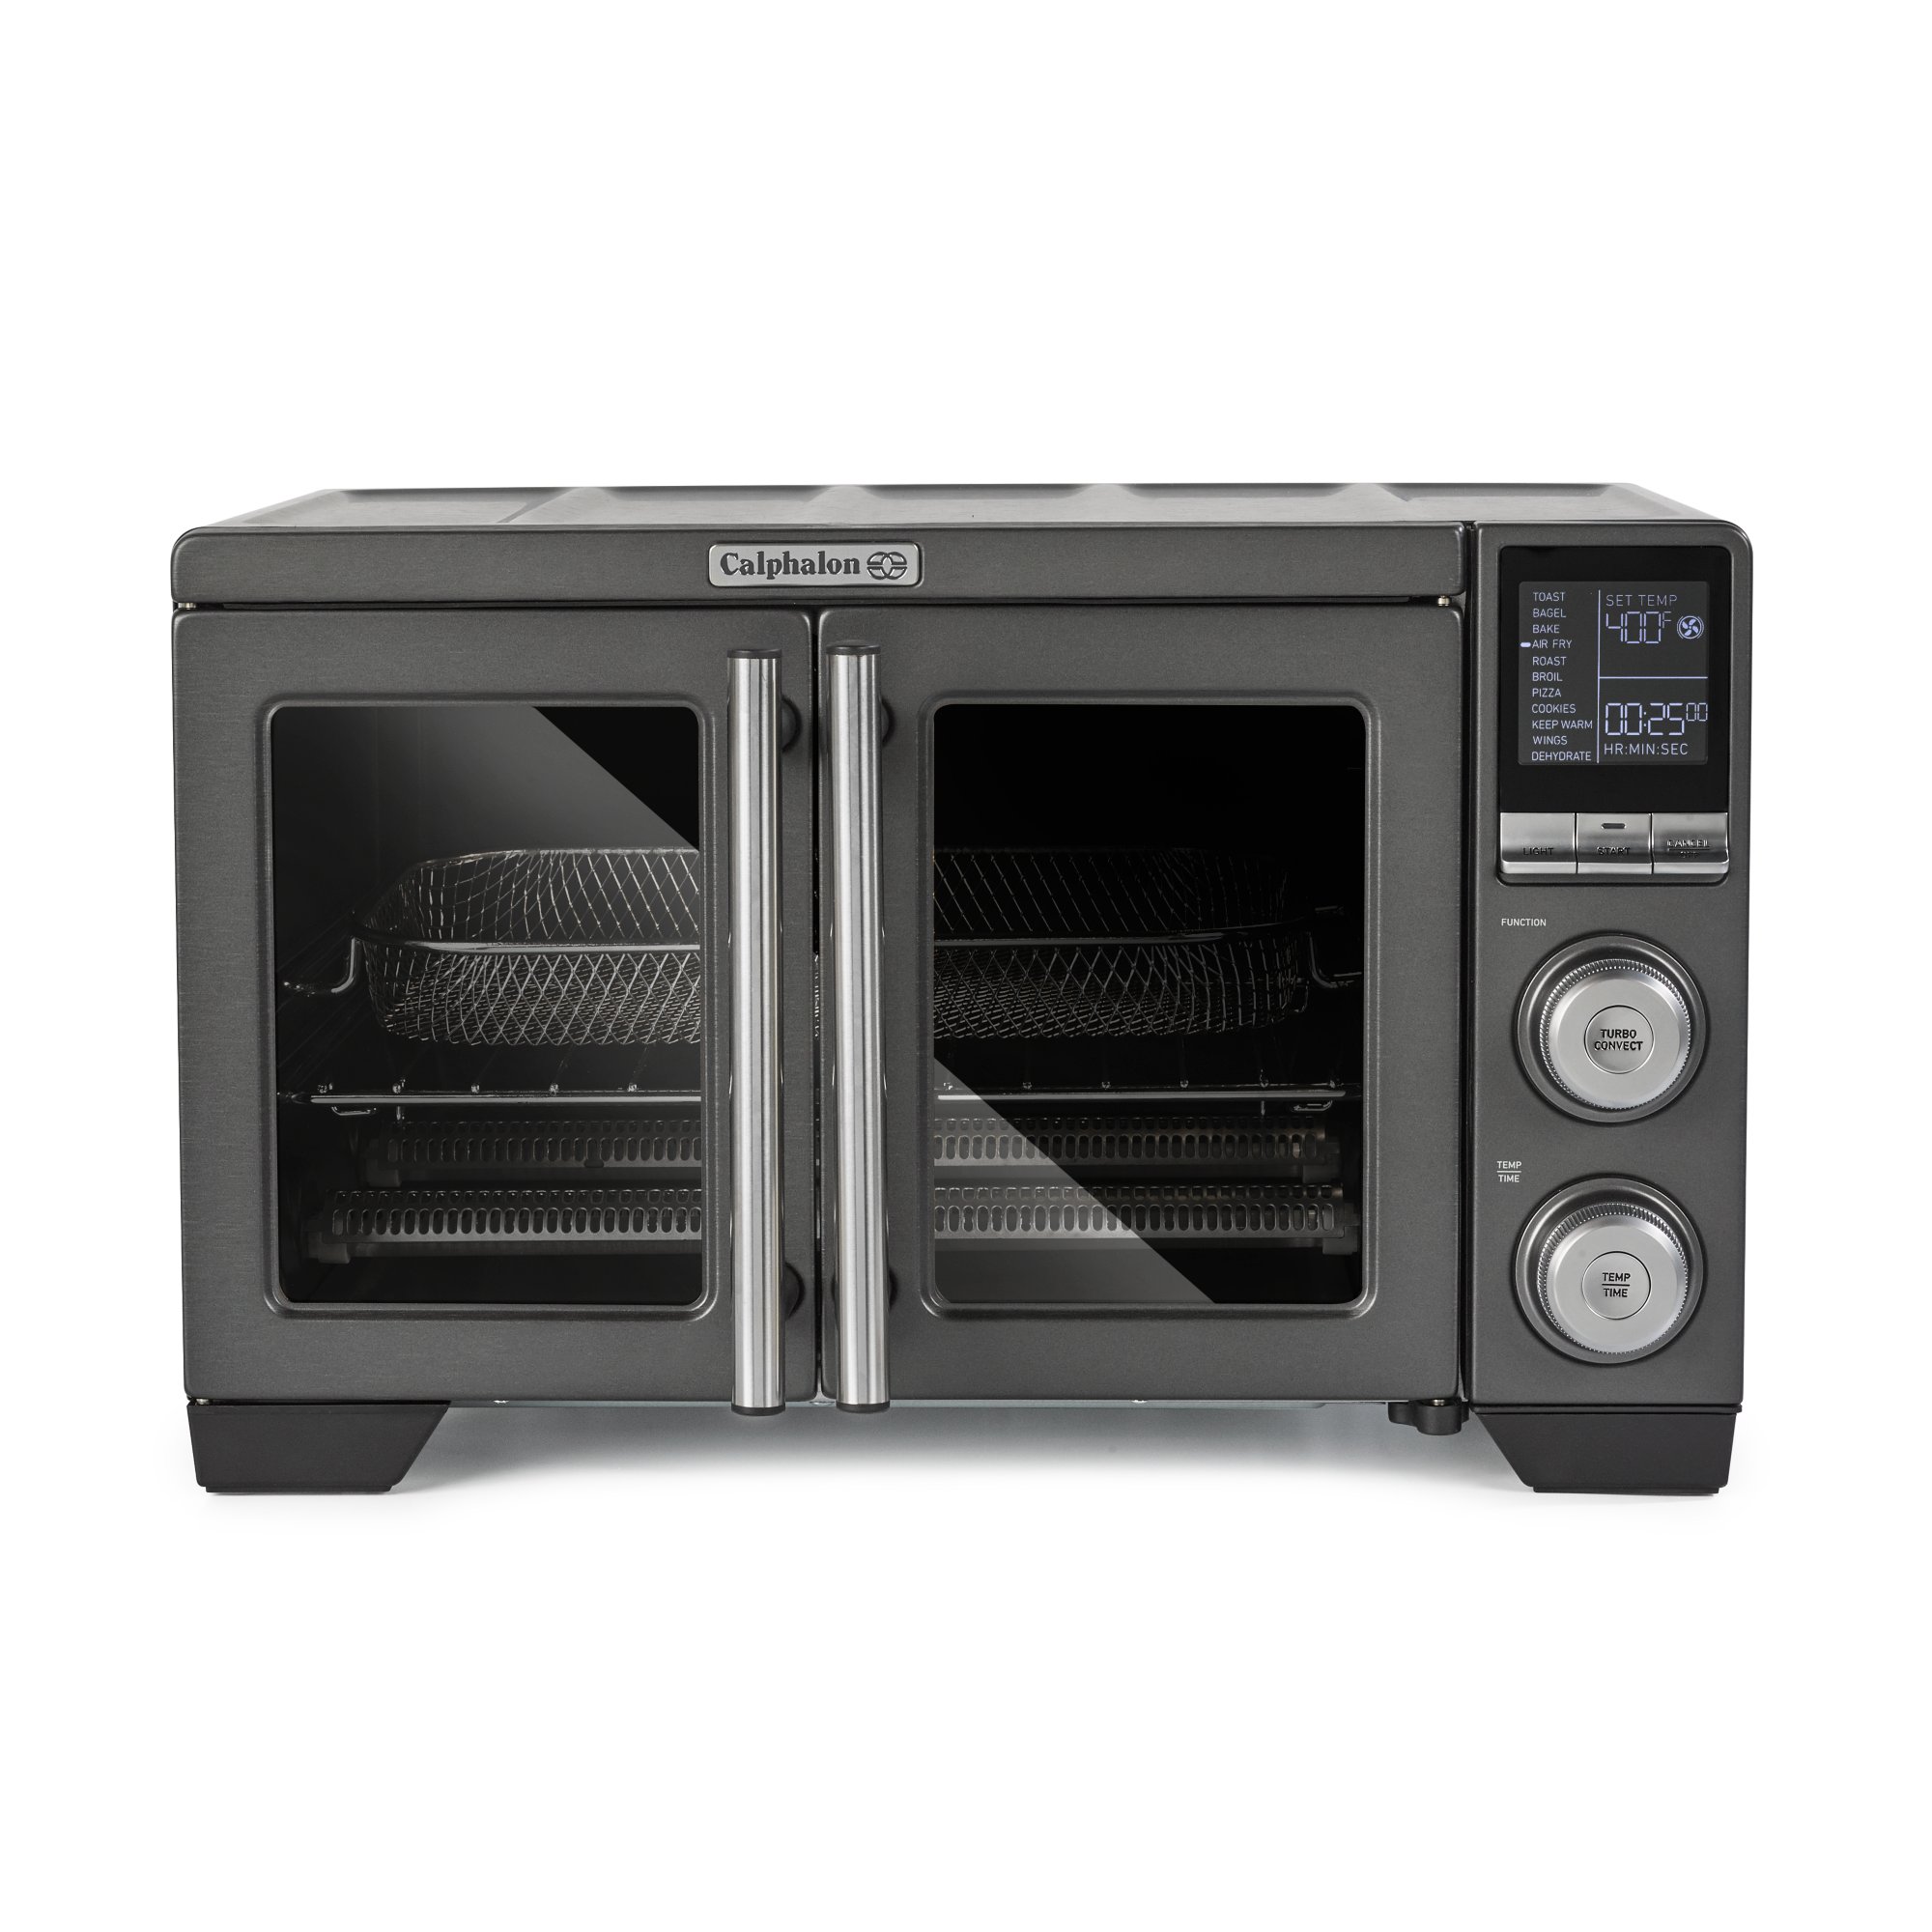 Our Favorite Calphalon Air Fryer Toaster Oven Is 45% Off at